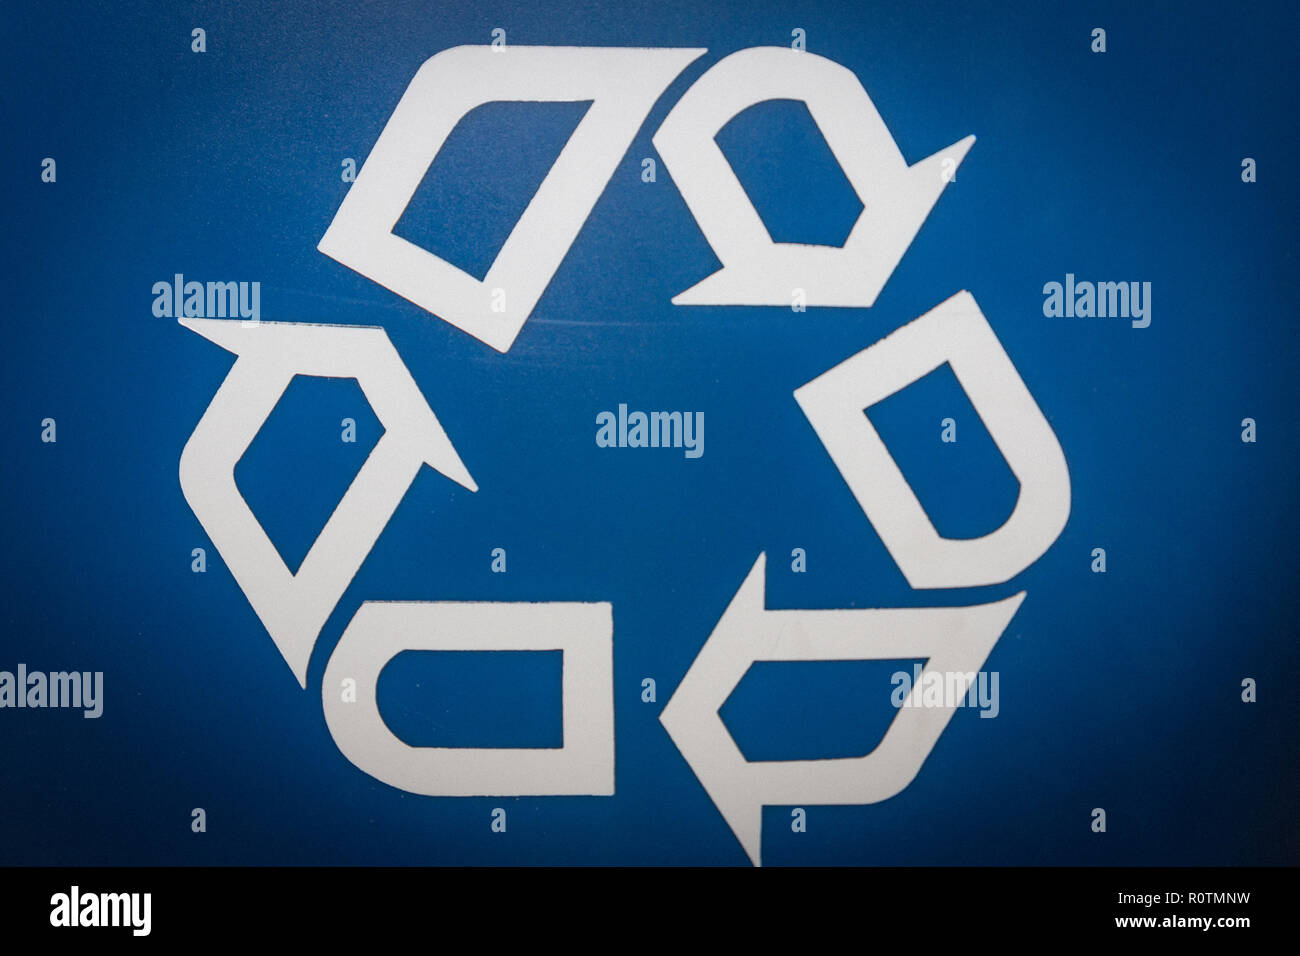 Recycling logo printed on a blue recycling bin Stock Photo